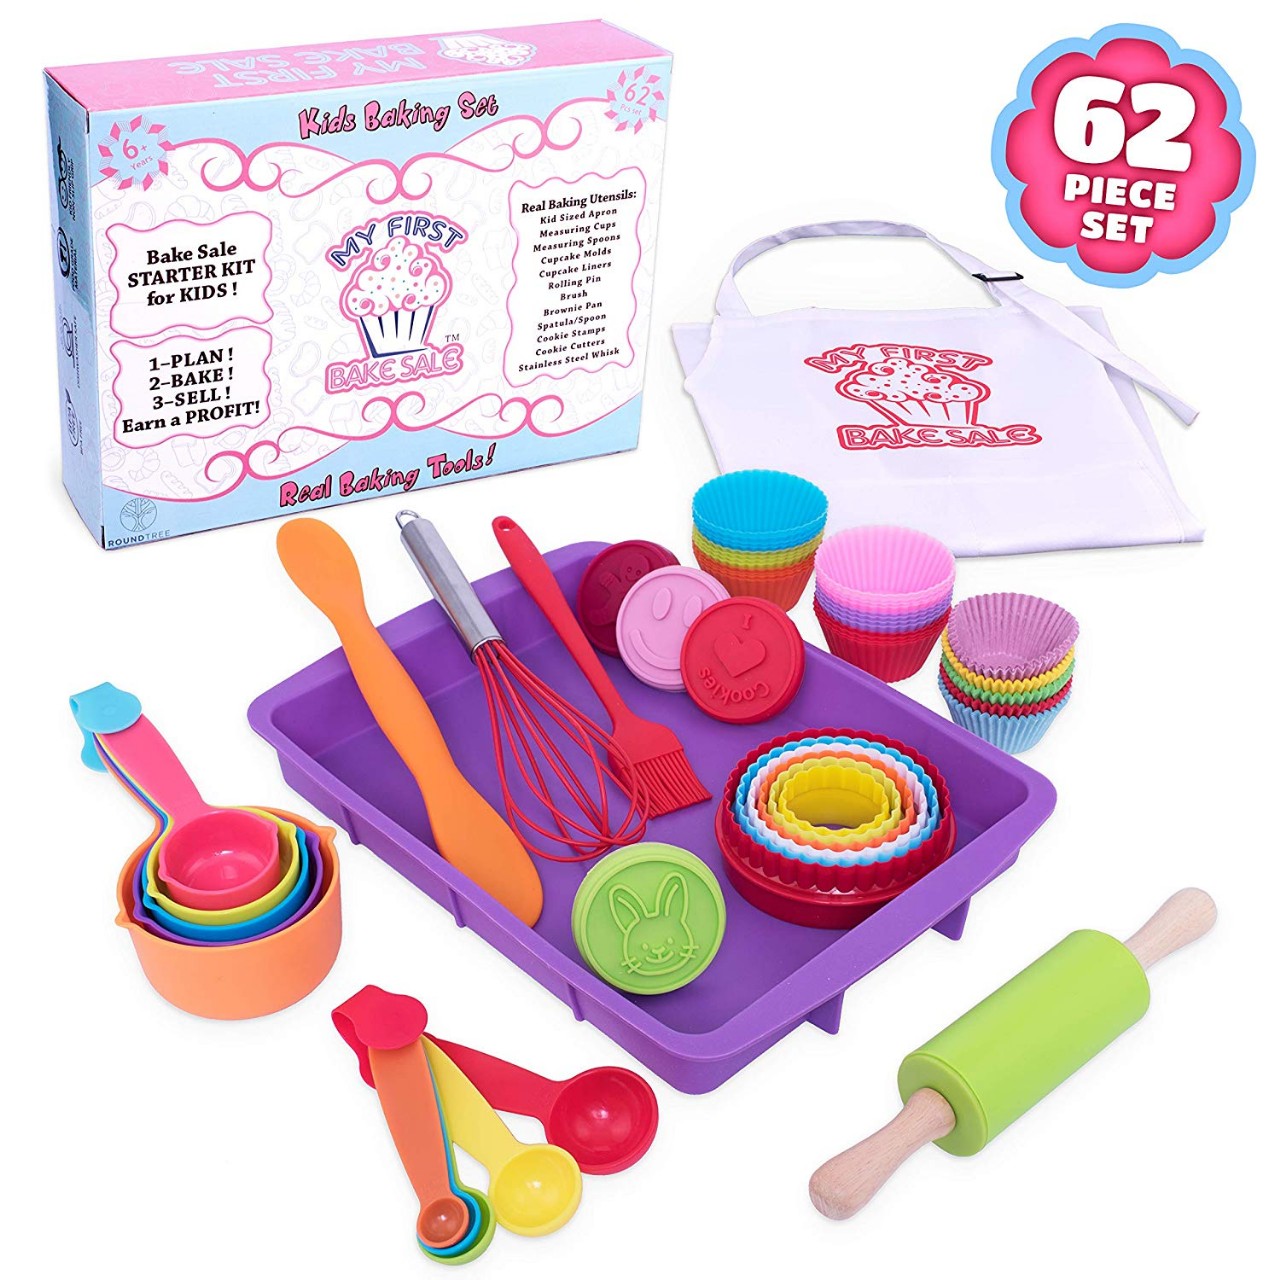 My First Bake Sale Kids Baking Set, Kids Cooking Supplies for Making Pastries, Cupcakes, Cakes, Cook